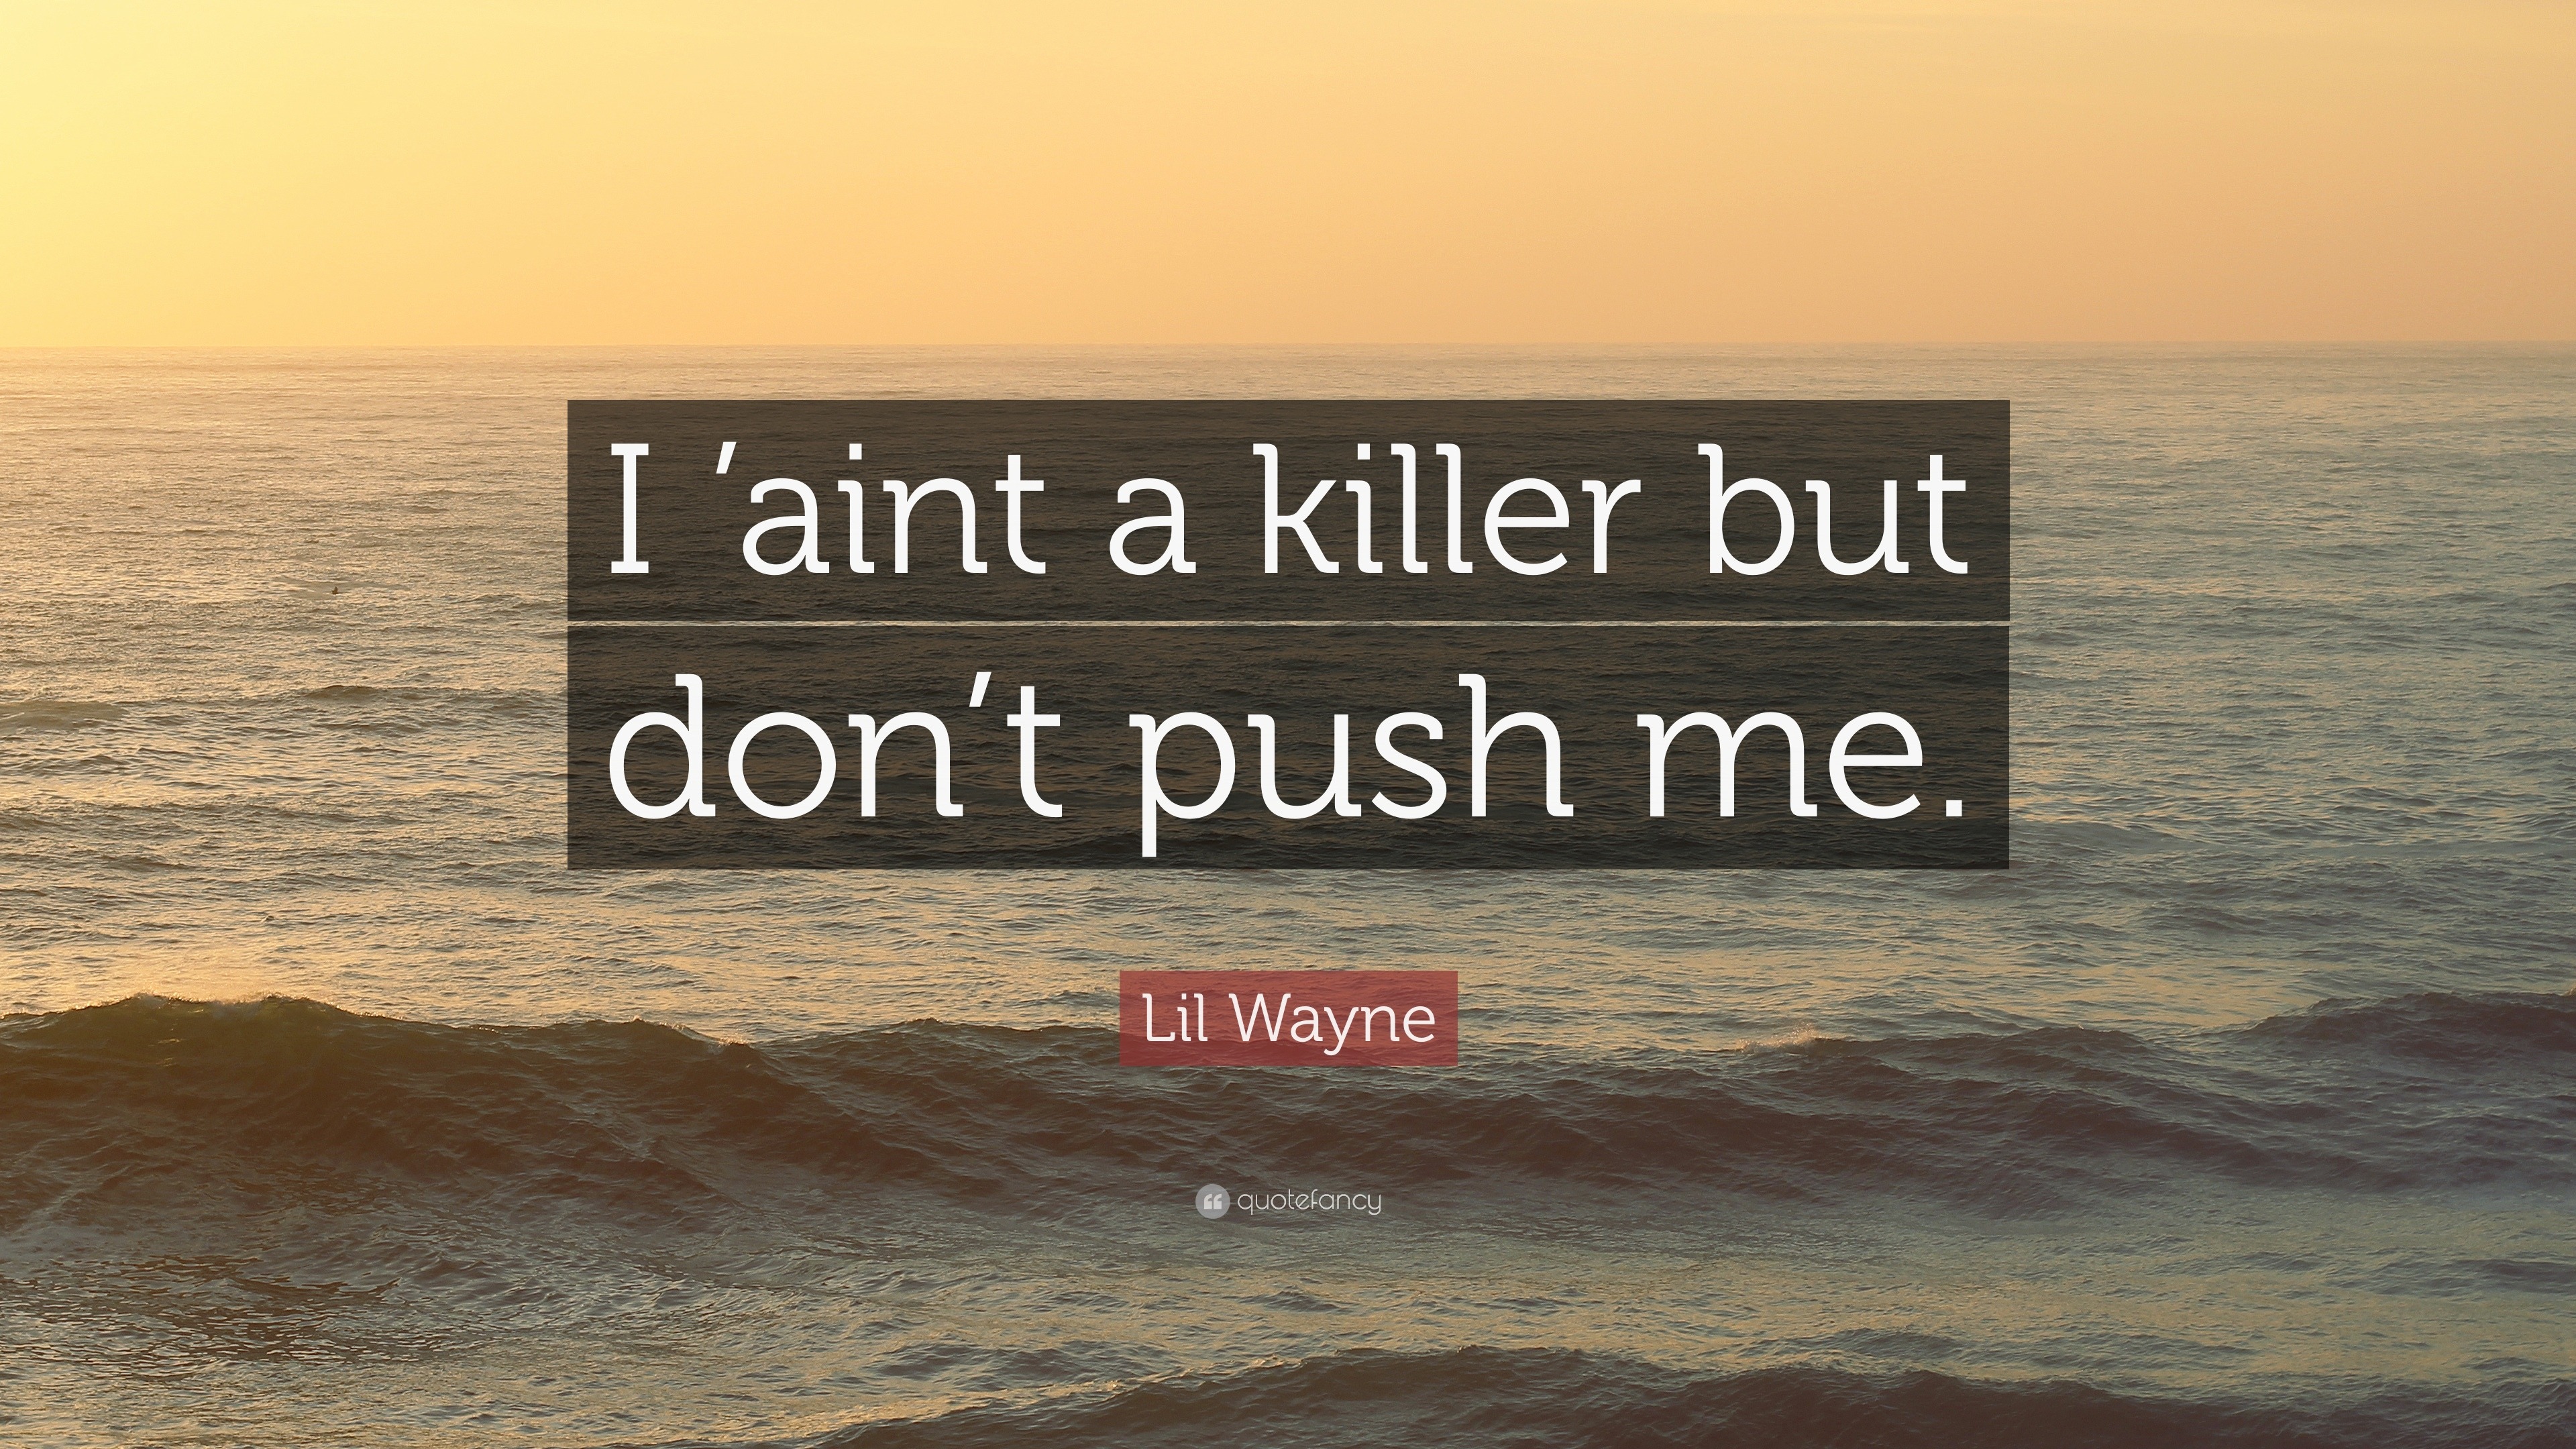 Lil Wayne Quote “I aint a killer but don t push me